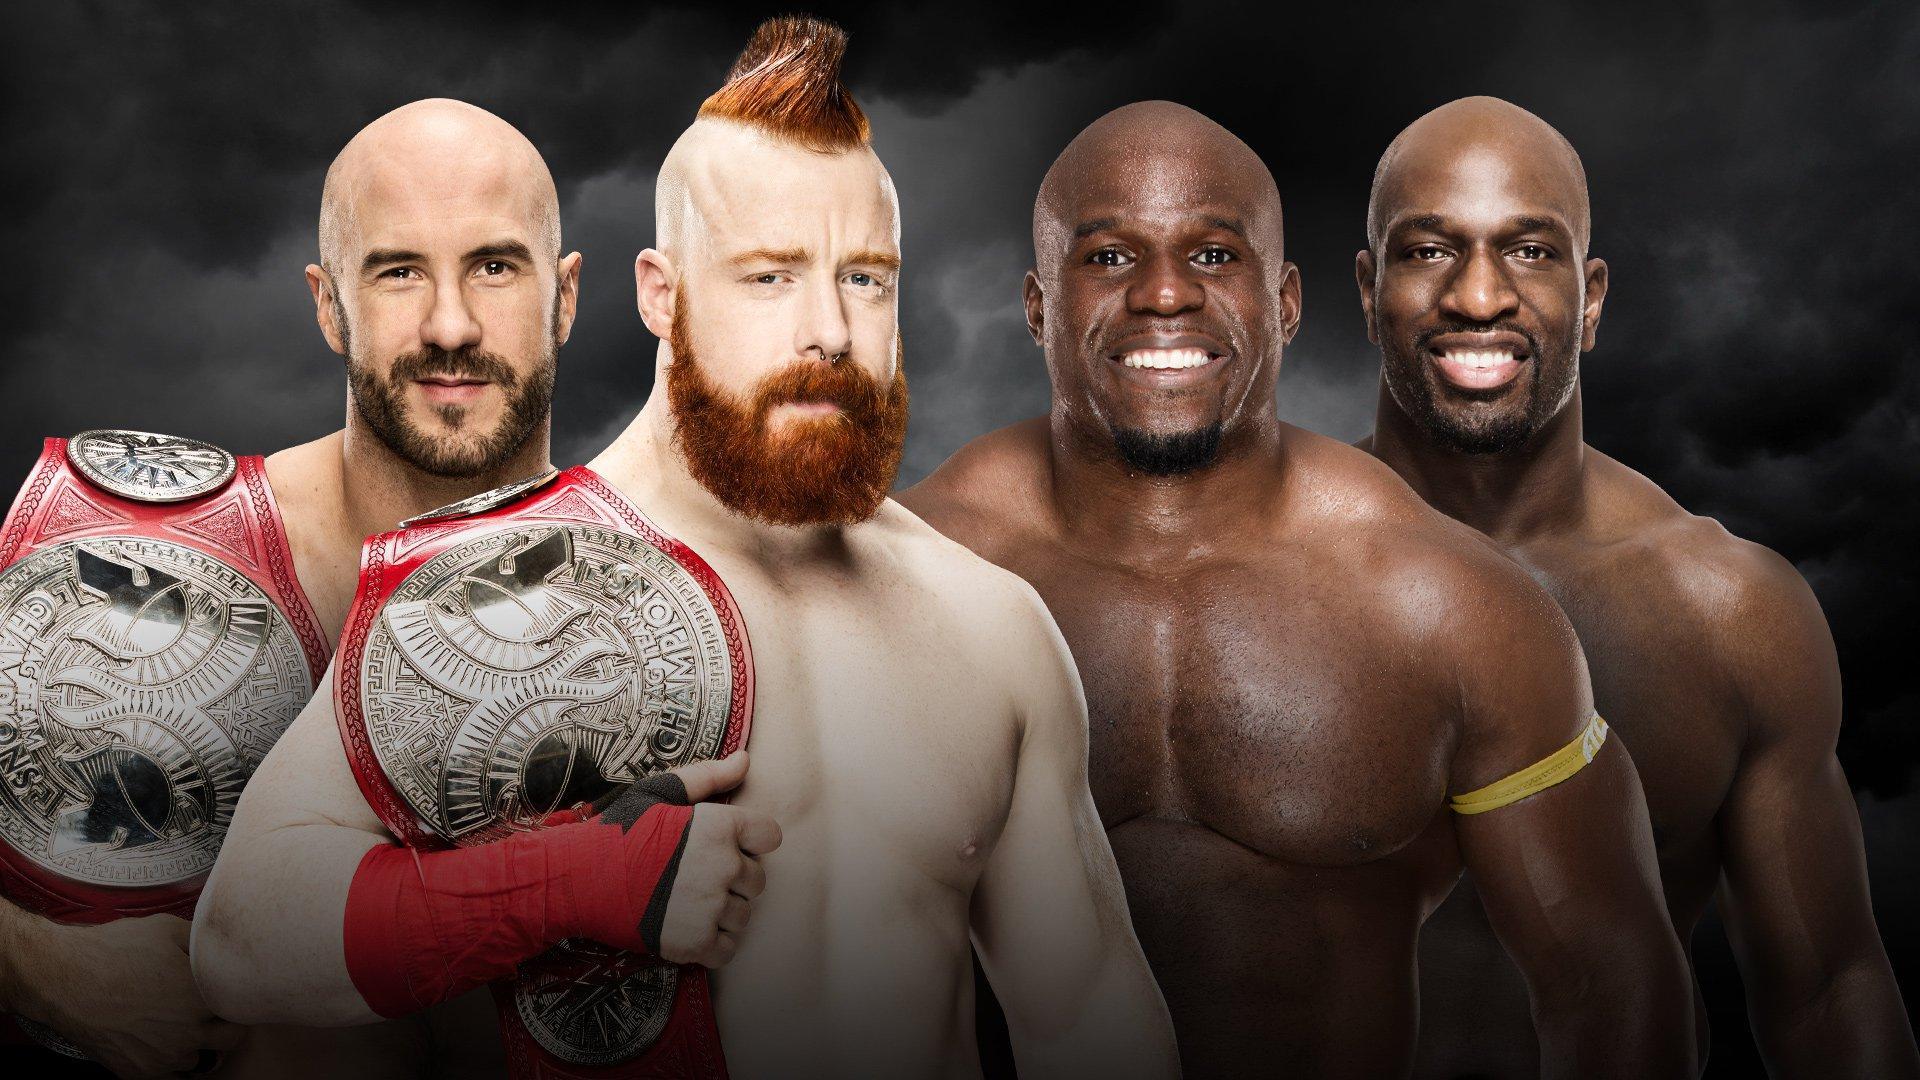 Two tag team matches confirmed for WWE Elimination Chamber